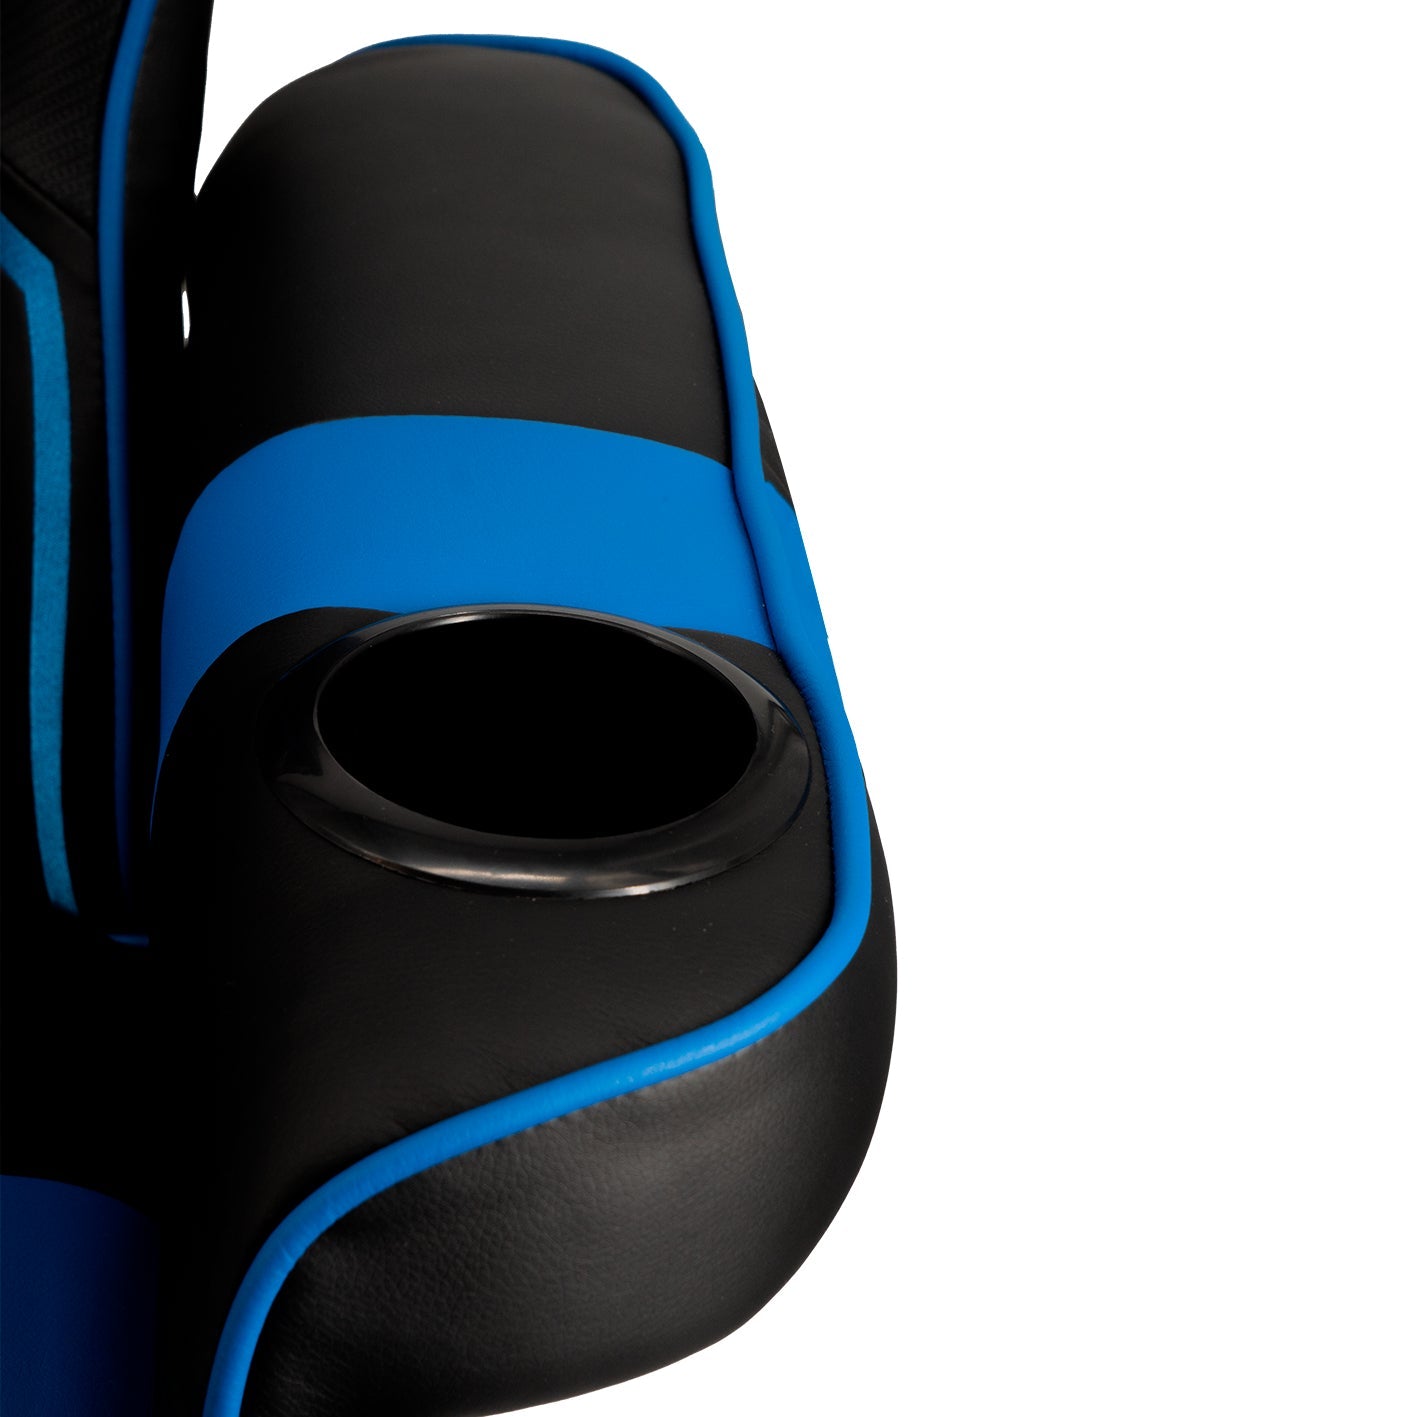 Blue Stanza Gaming Recliner by Turismo Racing